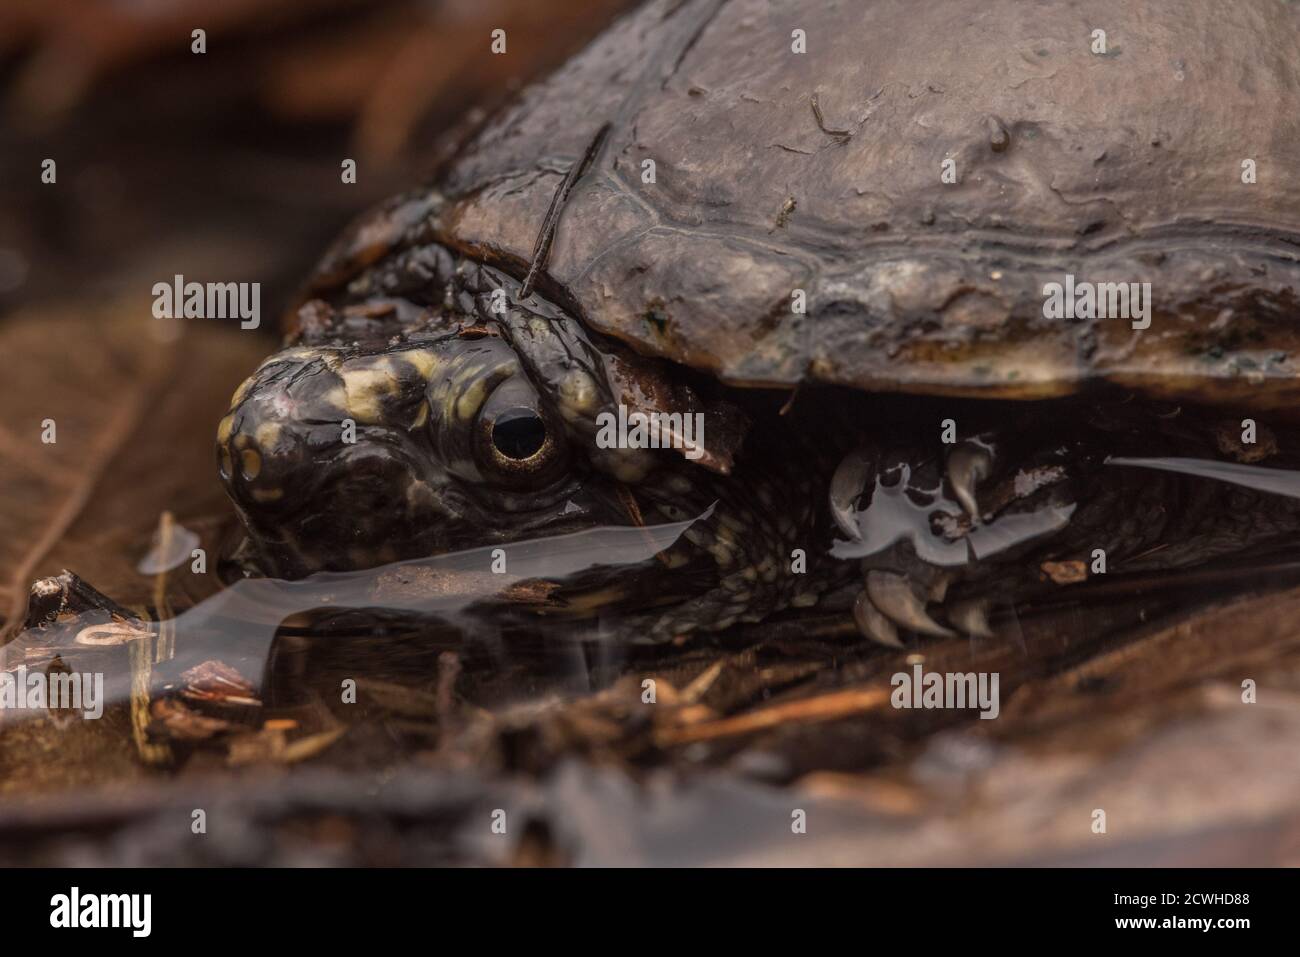 A common musk turtle, eastern musk turtle, or stinkpot (Sternotherus odoratus) hiding in shallow water in Eastern North Carolina. Stock Photo